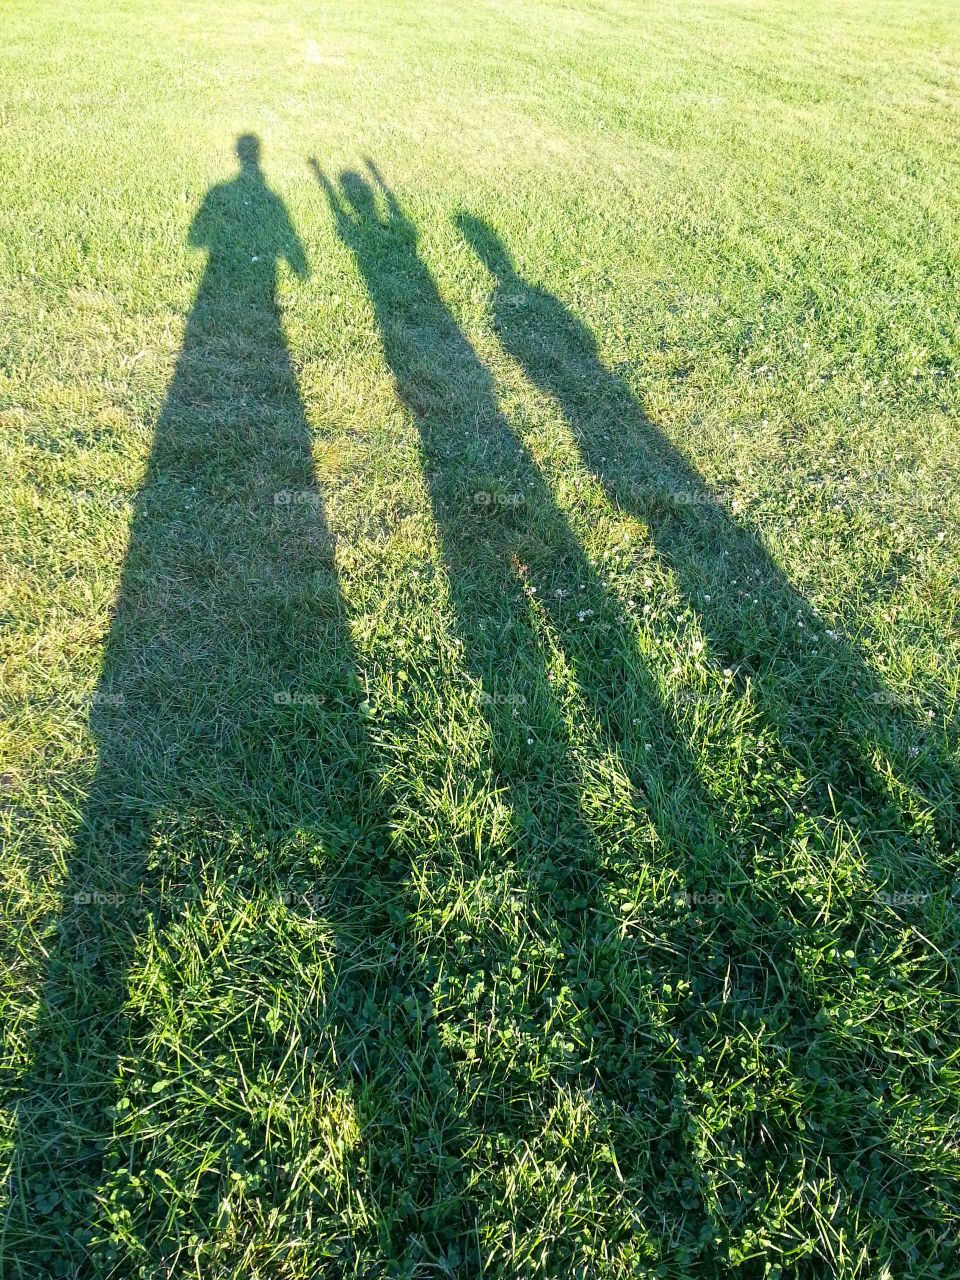 Shadows of 3 persons on turf in summer